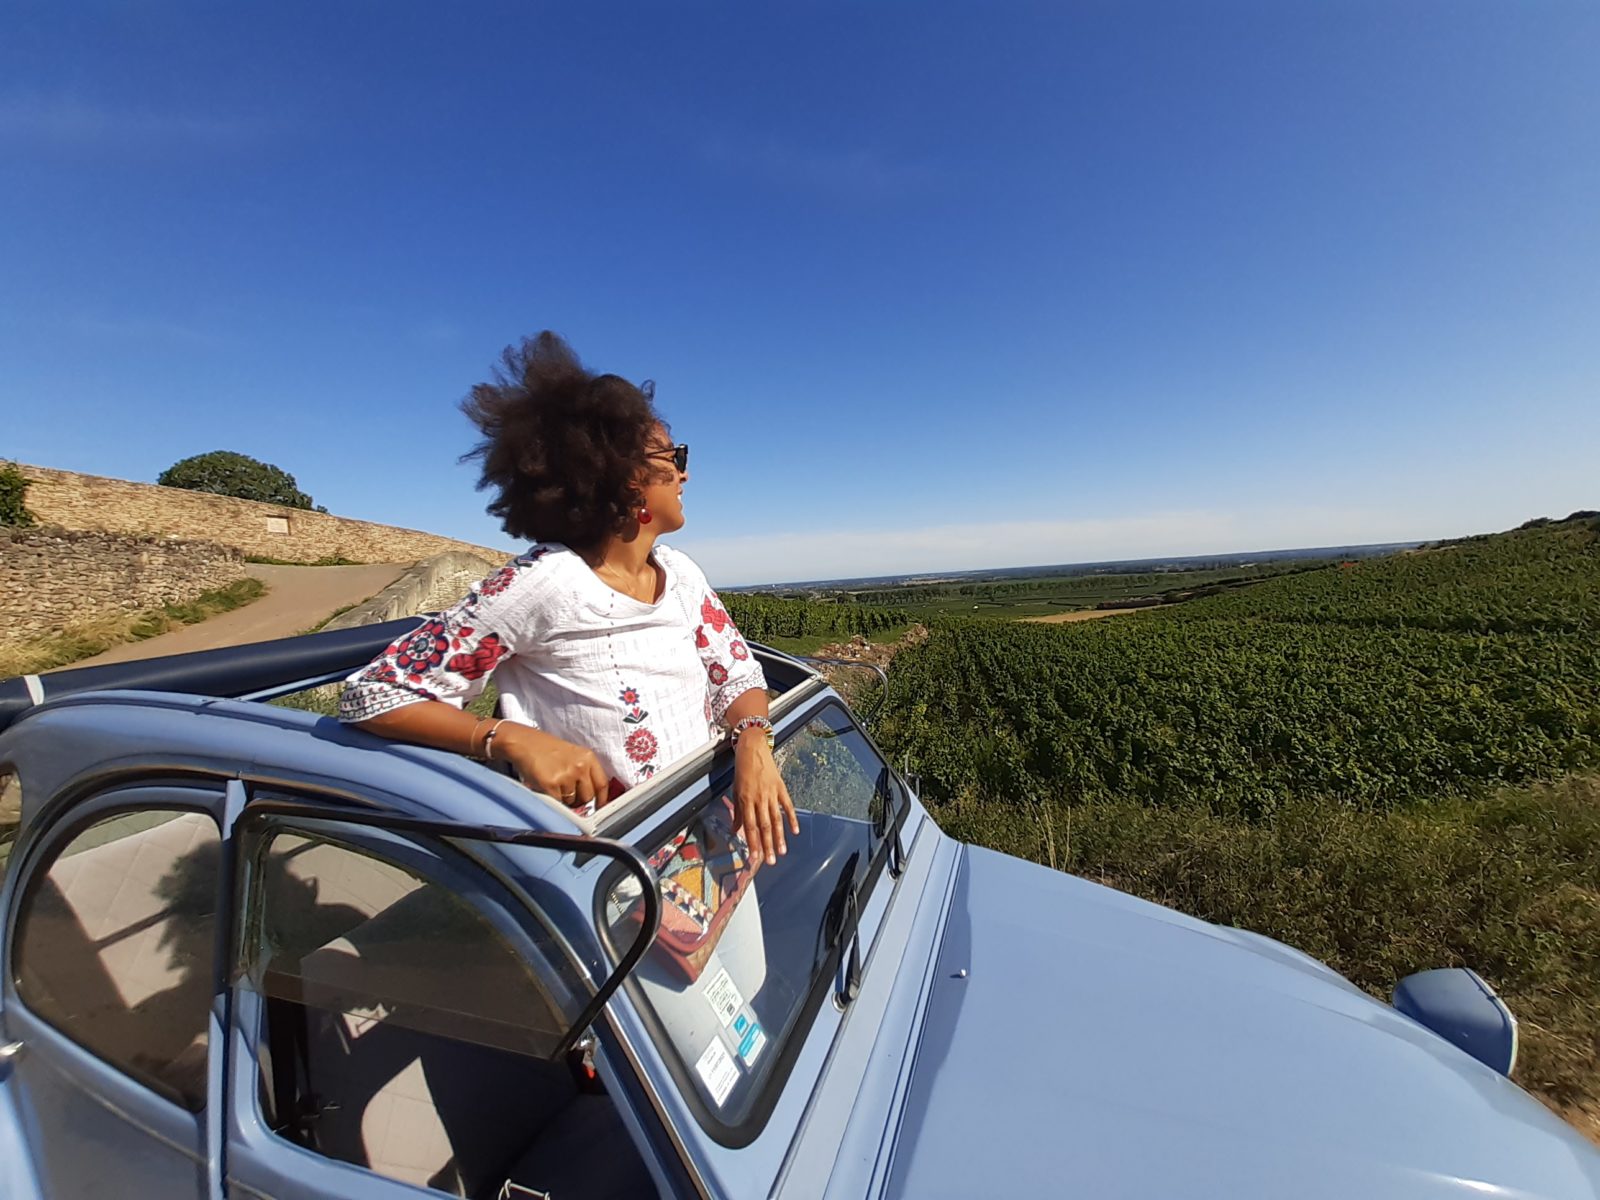 Live a unique experience in the vineyard of Burgundy